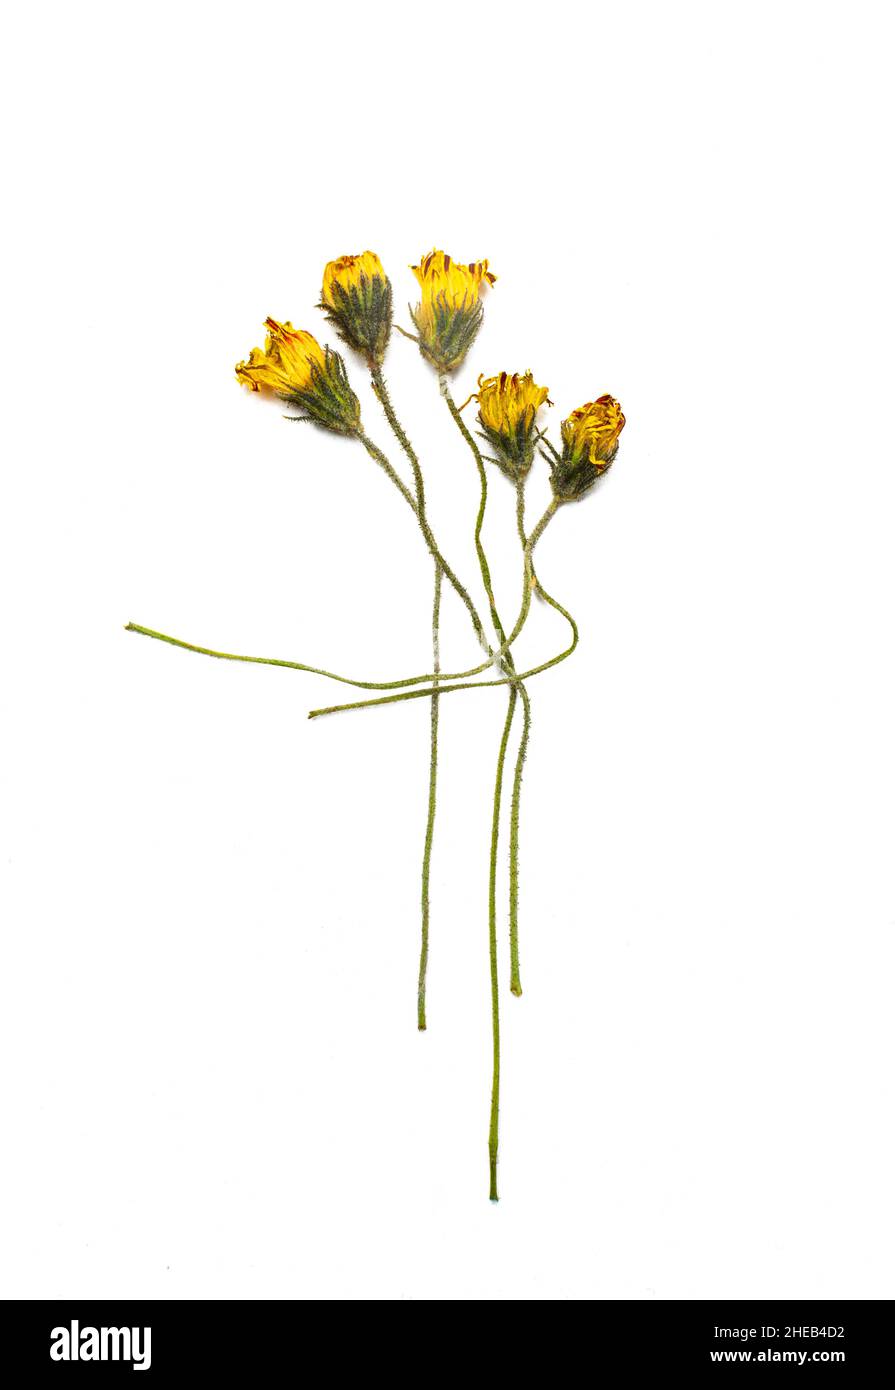 Faded yellow flowers on a white background Stock Photo